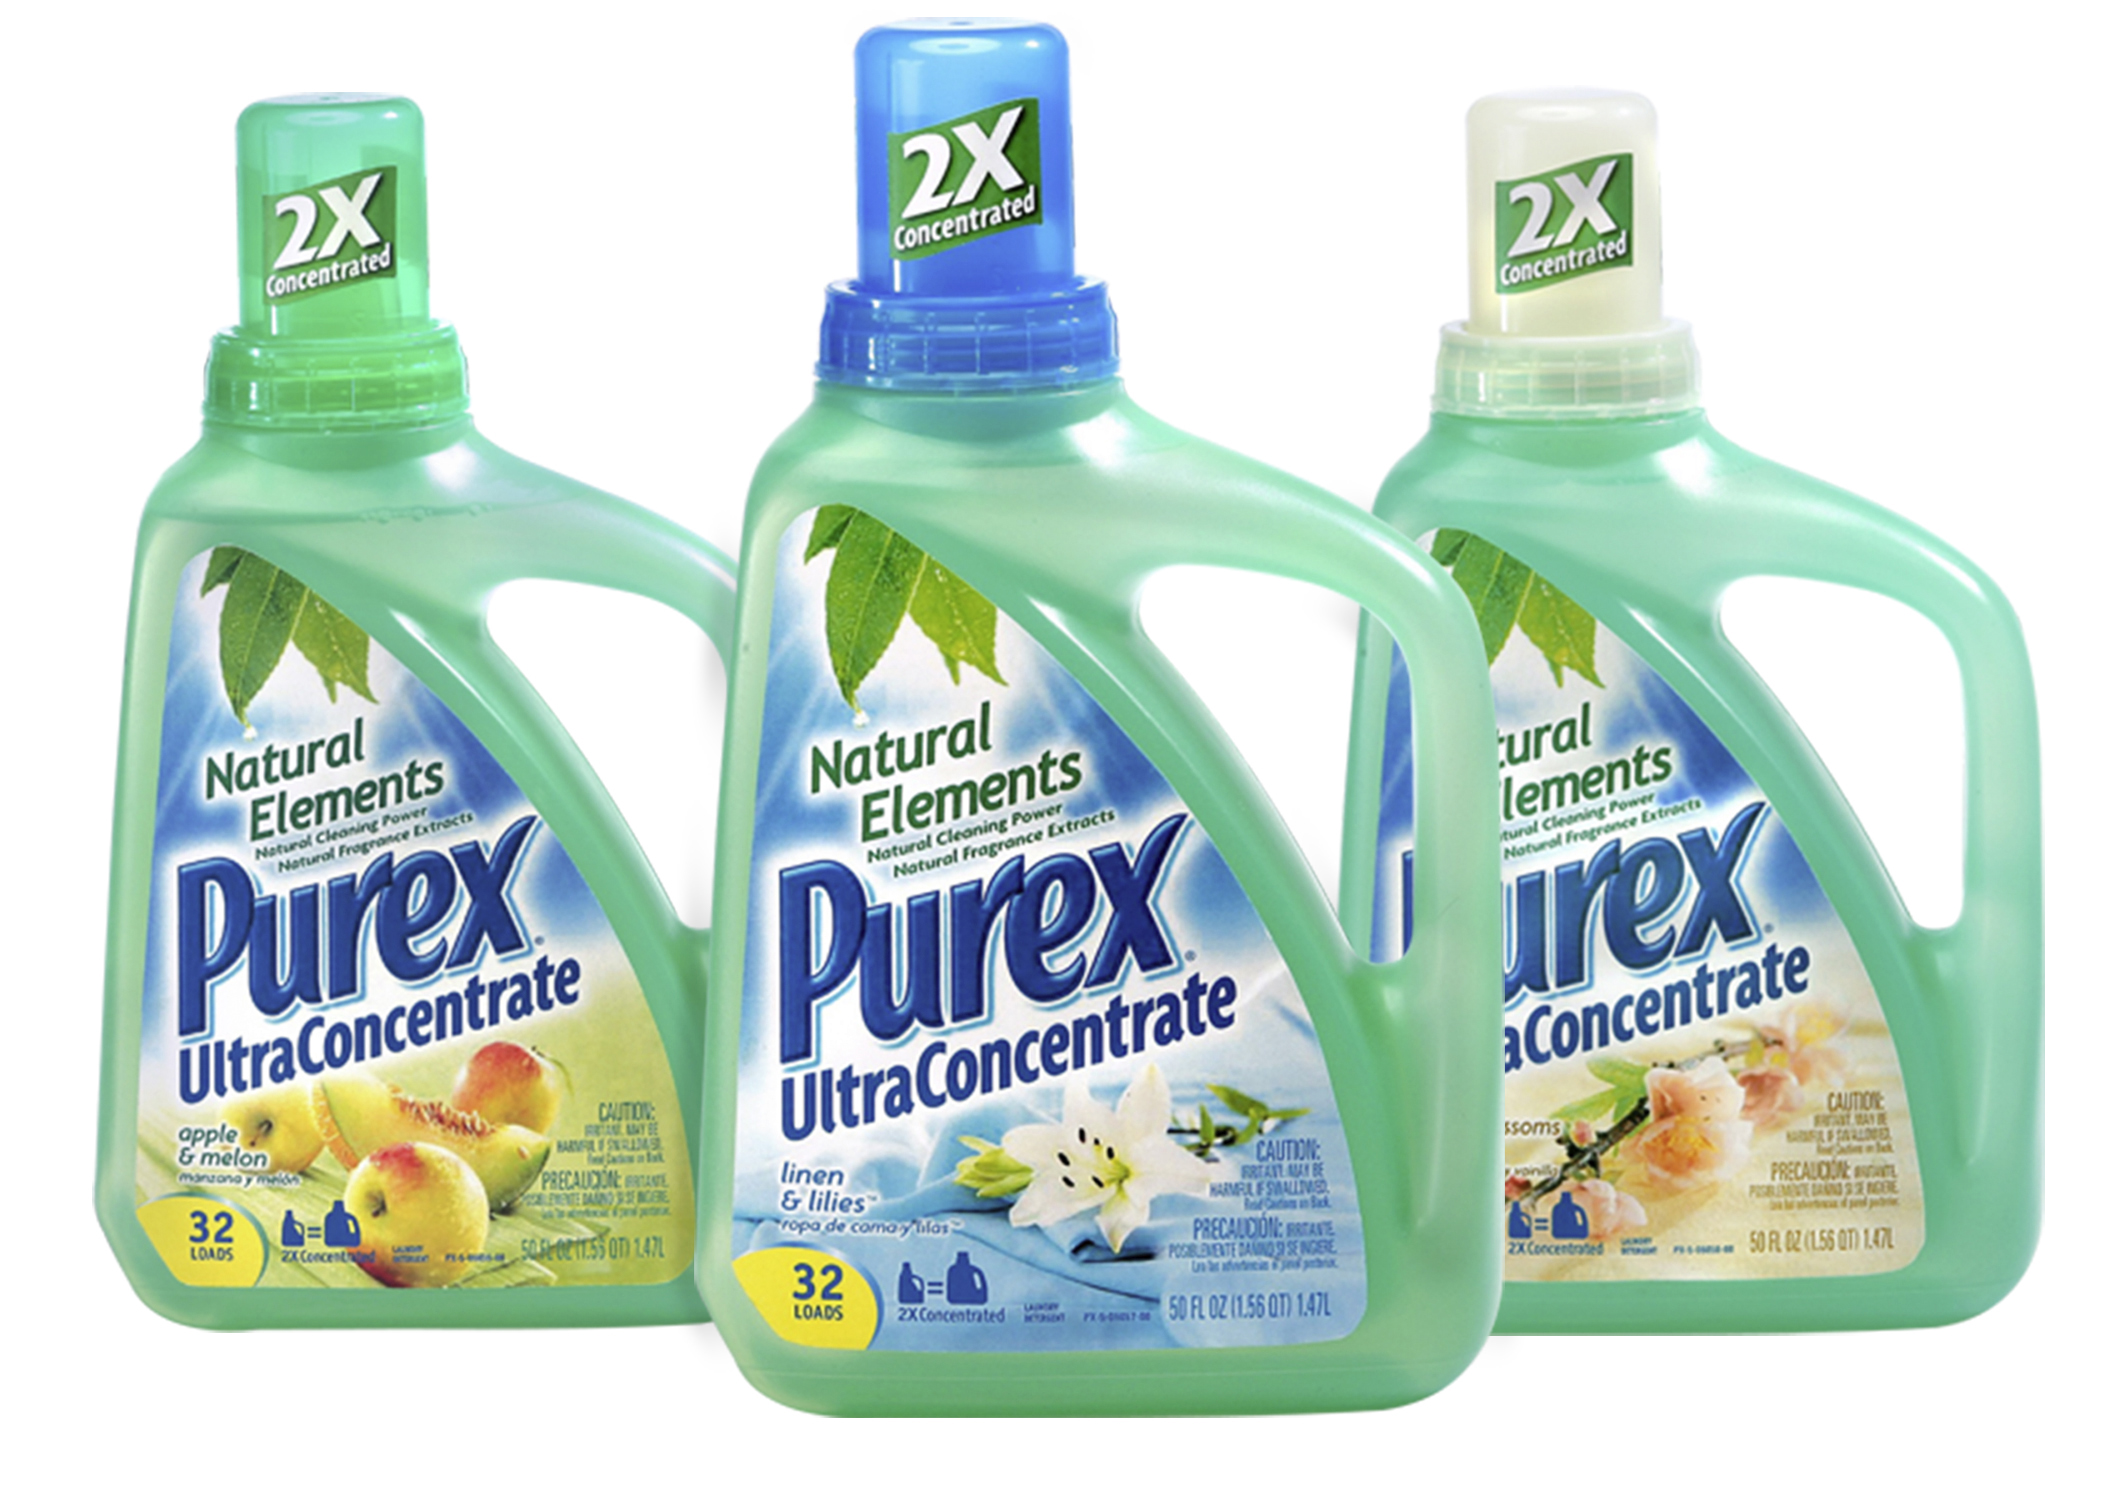 walgreens-free-purex-eye-shadow-and-more-couponing-101